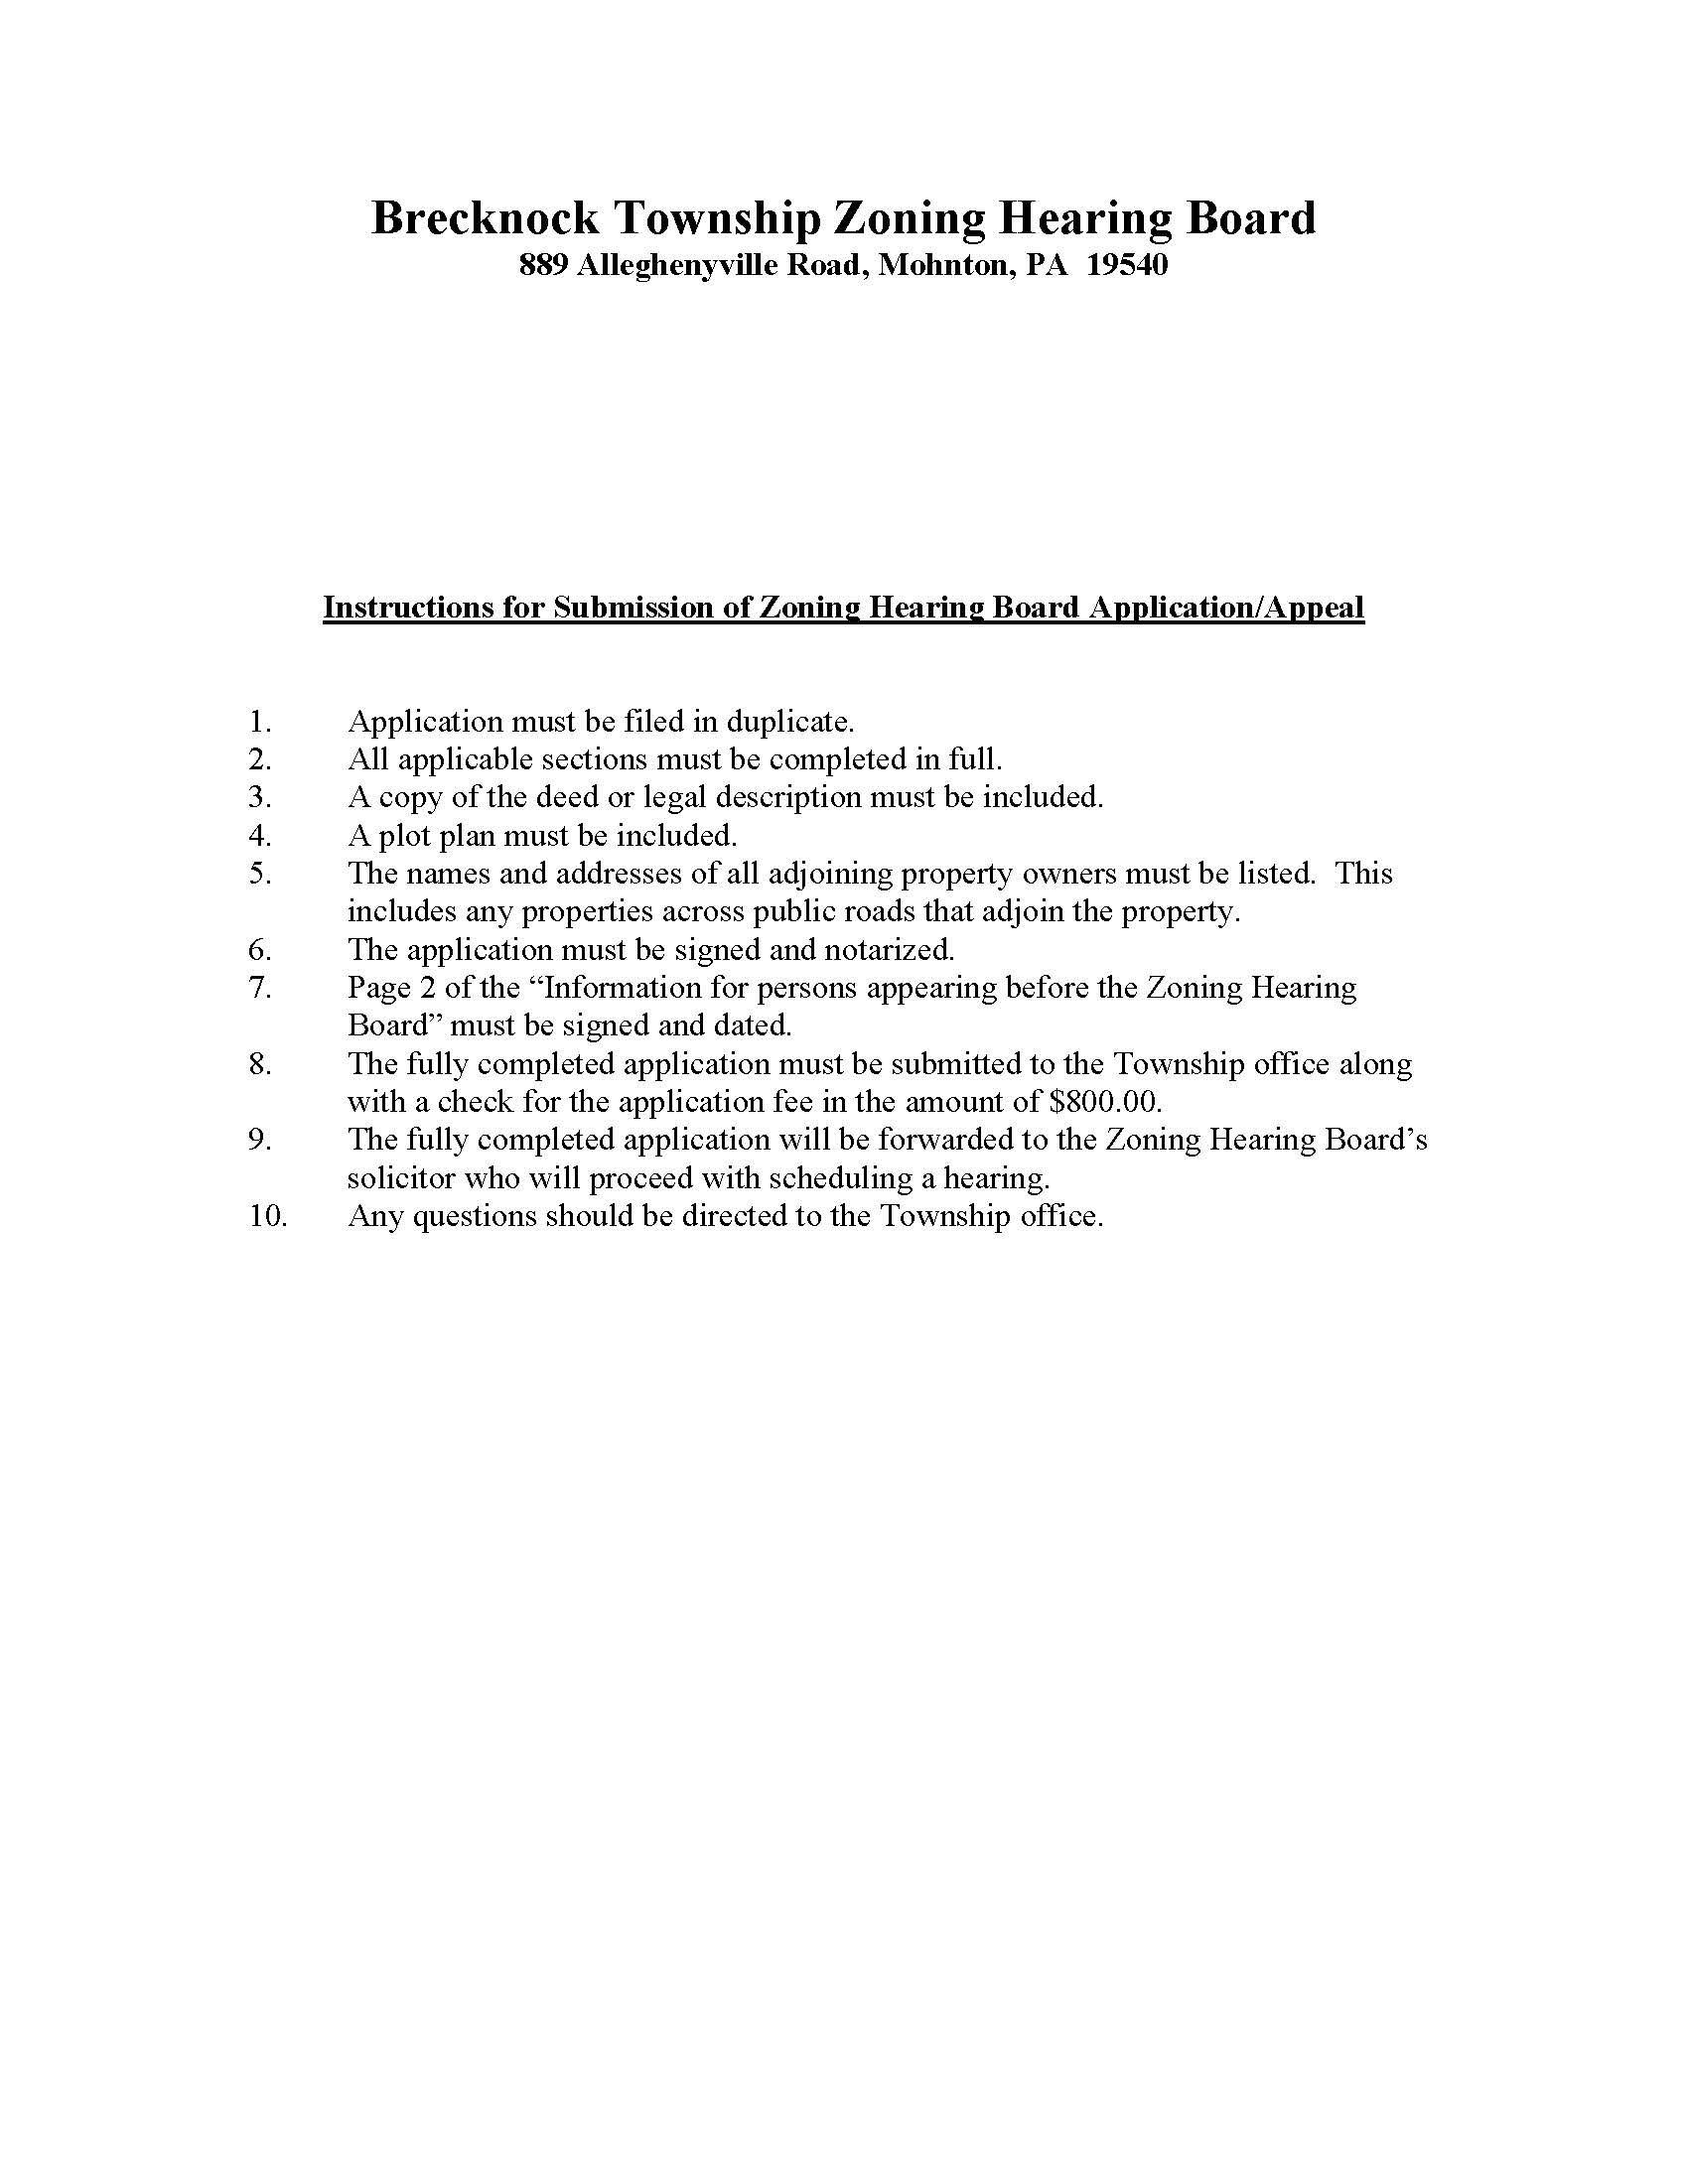 Zoning Hearing Board Instructions For Submission of Application